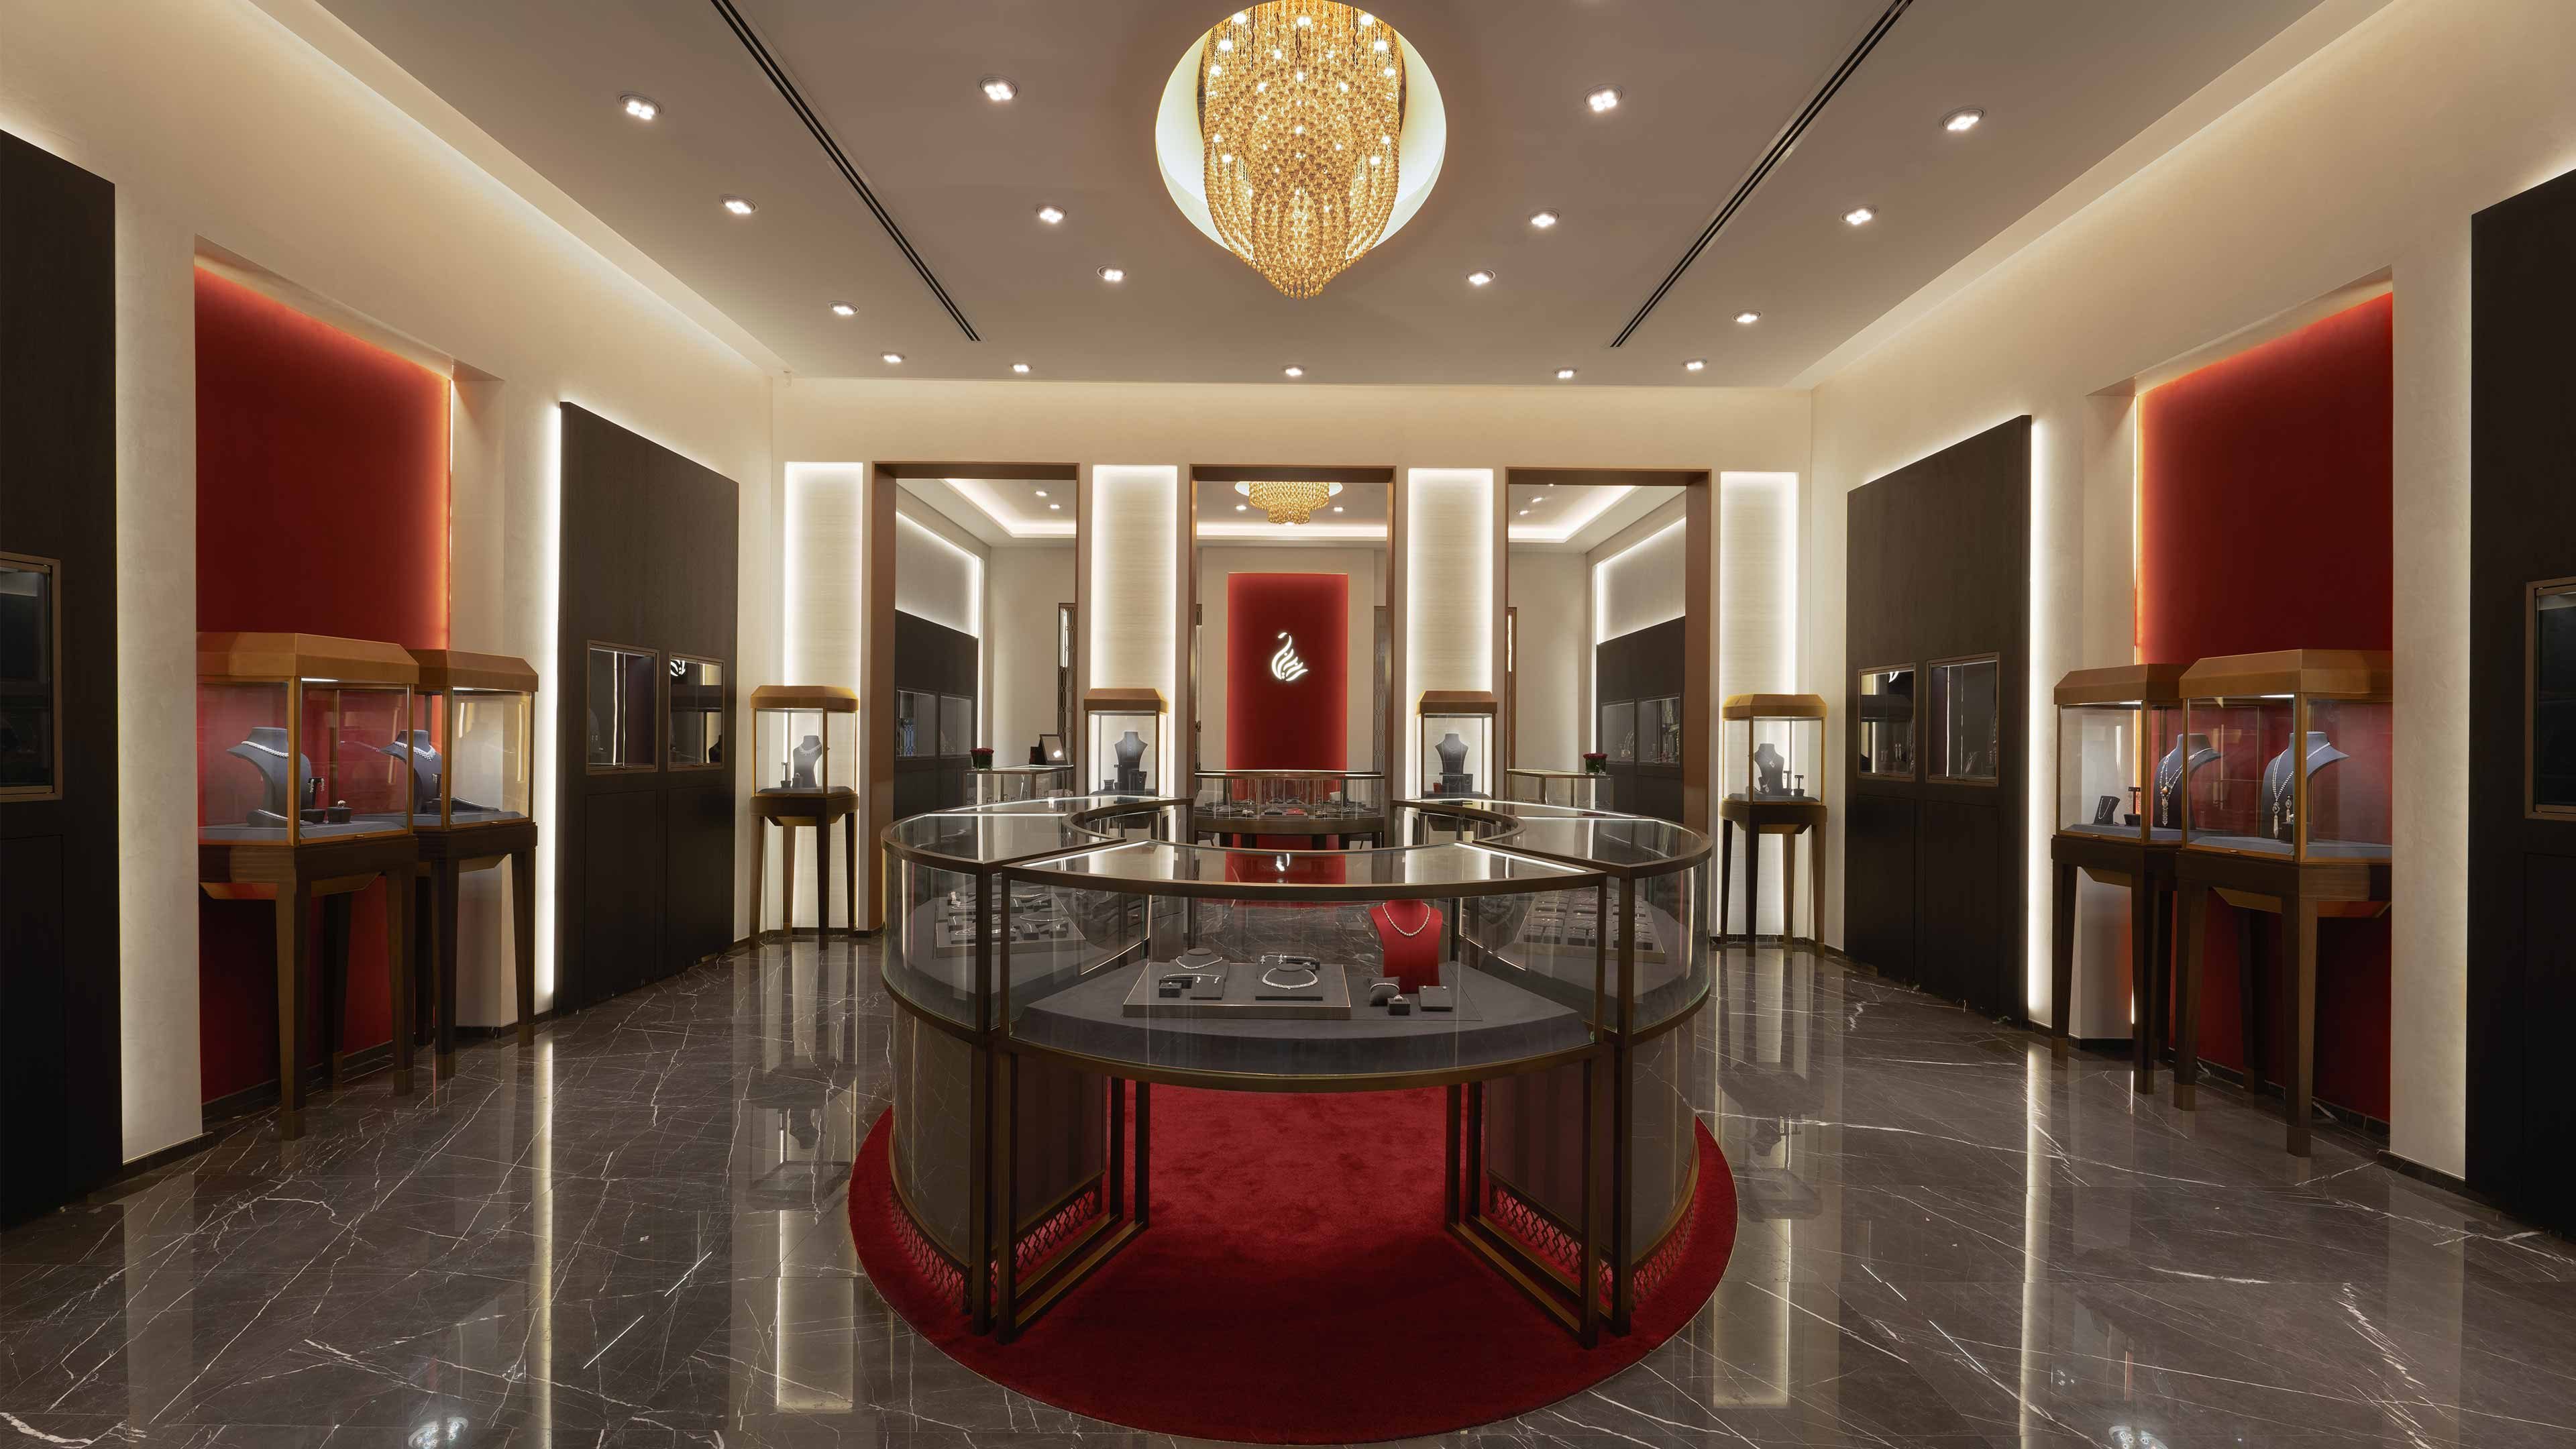 Architectural Lighting Design Luxury Retail Red Brown Interior Jewellery Store Integrated Illumination Ceiling Walls Merchandise Cases Counters Studio N